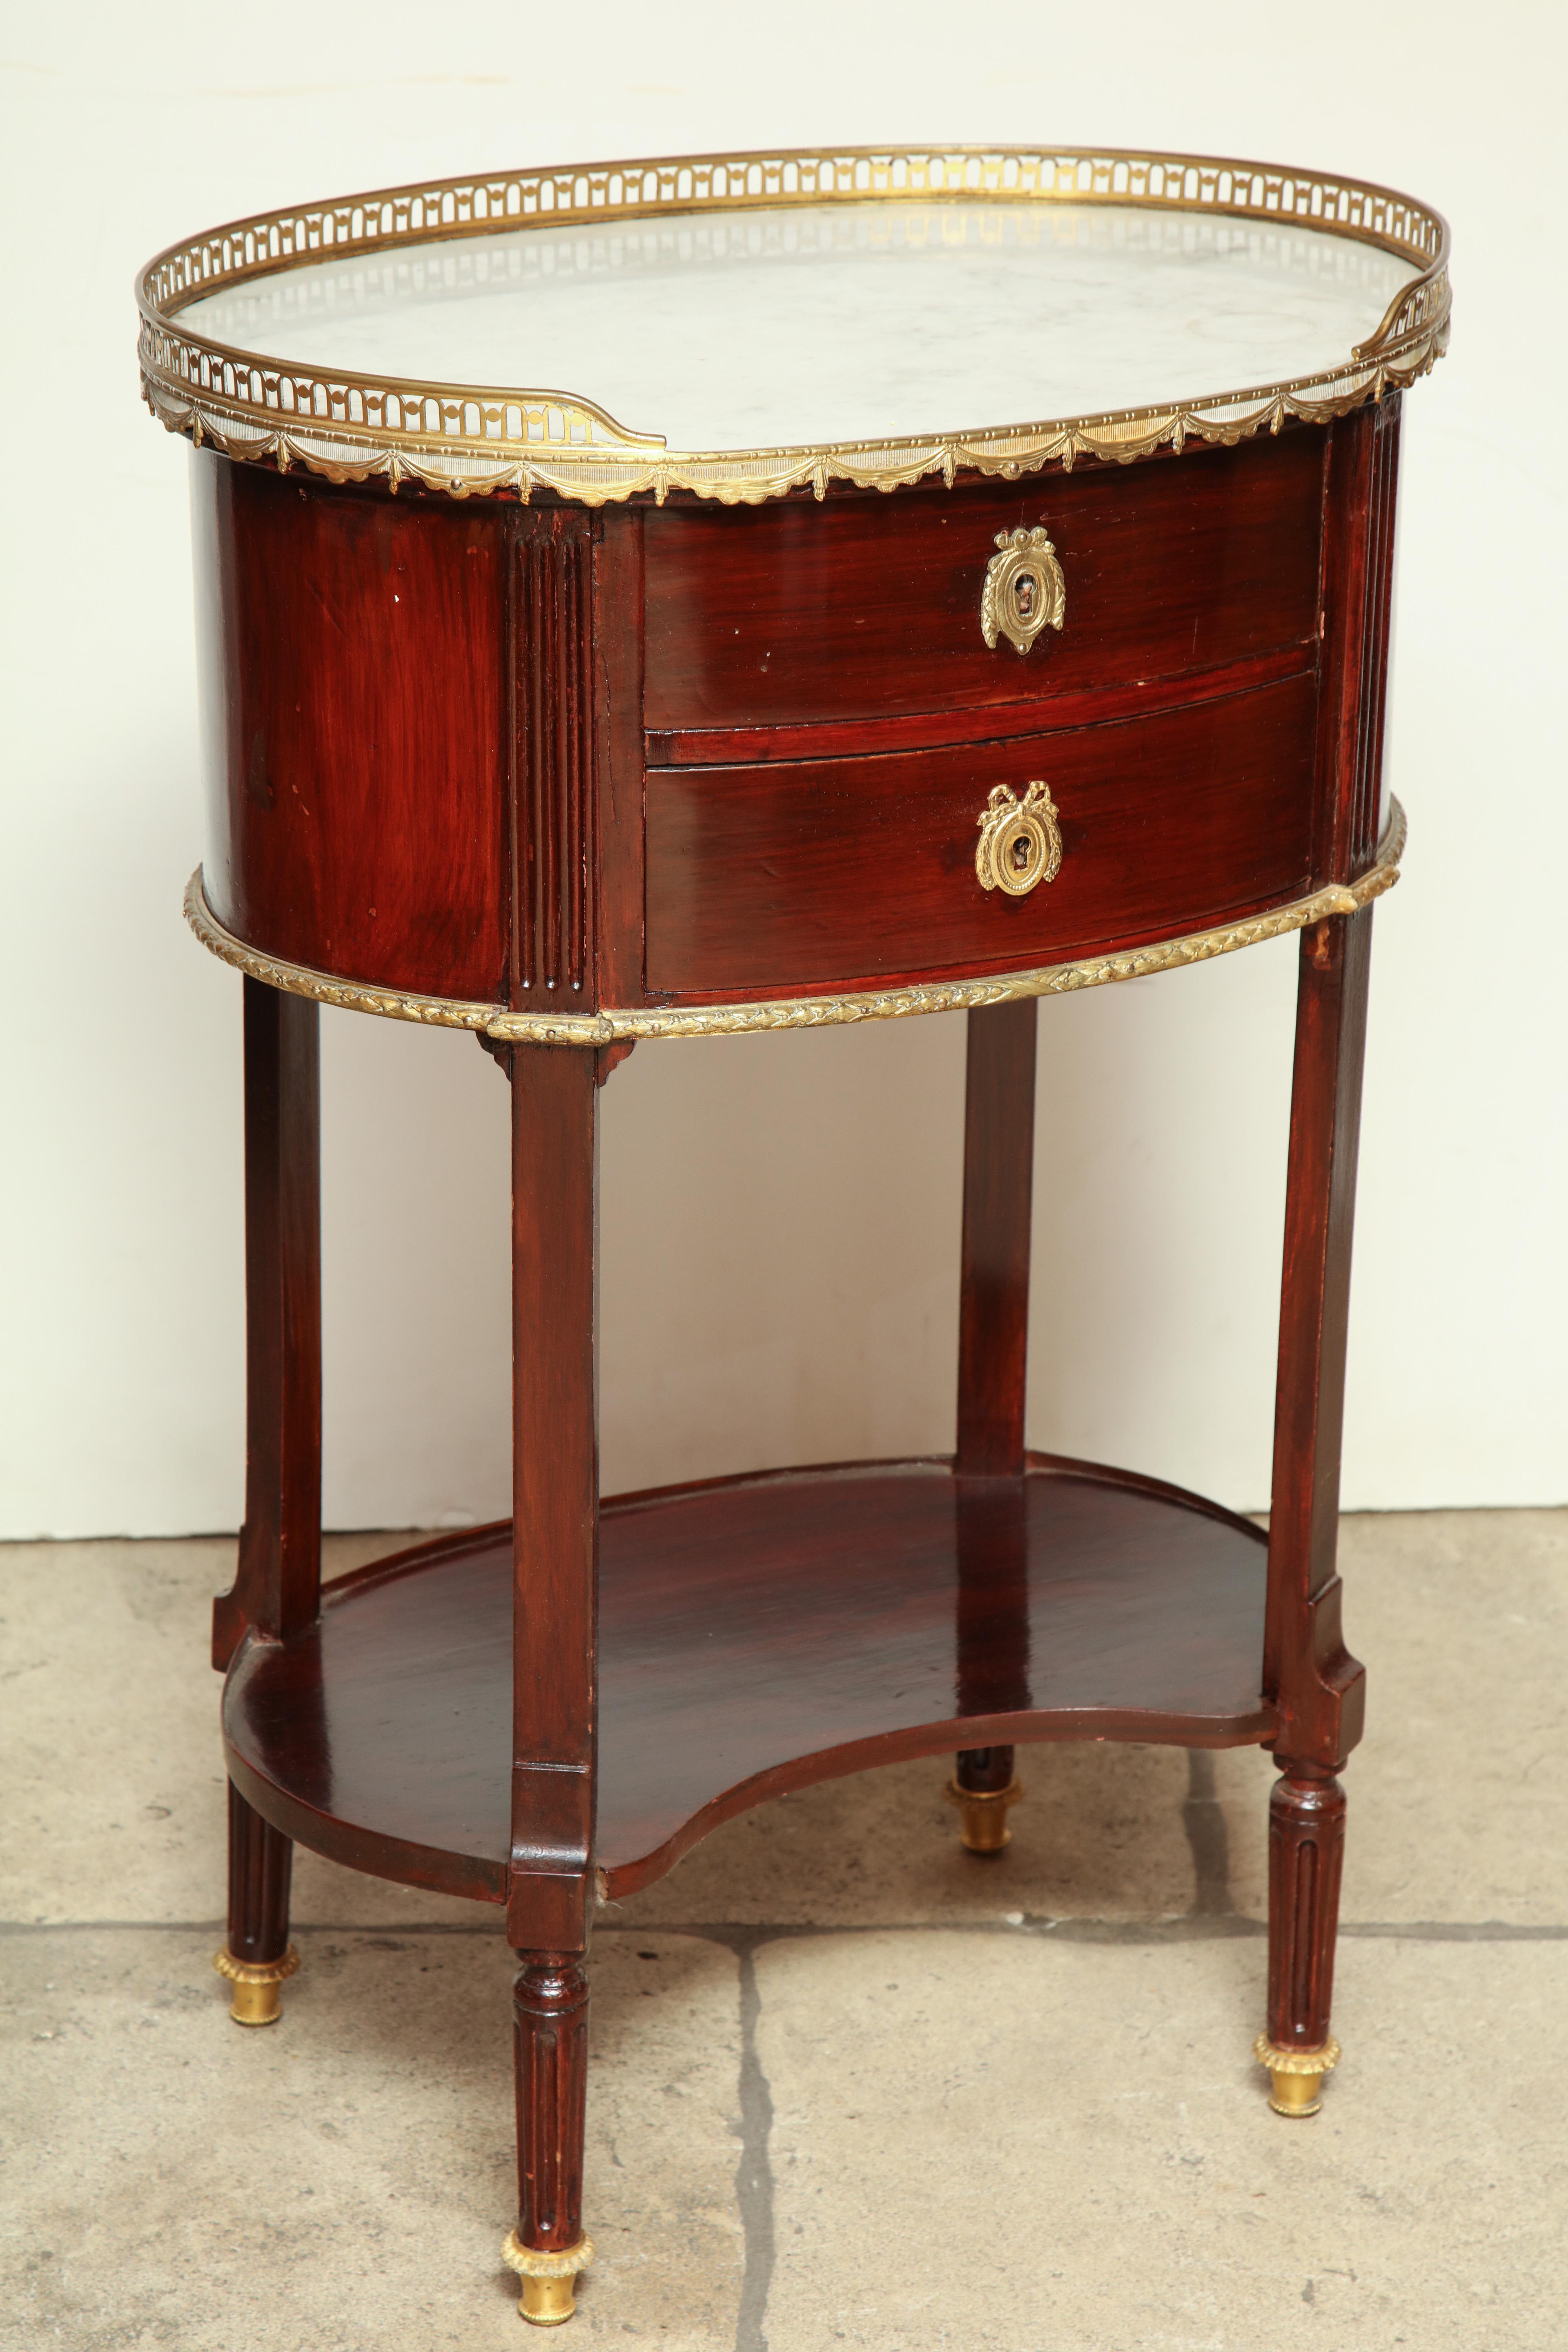 French Directoire mahogany oval side table with a Carrara marble top, bronze drapery pierced gallery trim, two front facing drawers, fluted legs and a kidney form shelf stretcher base.